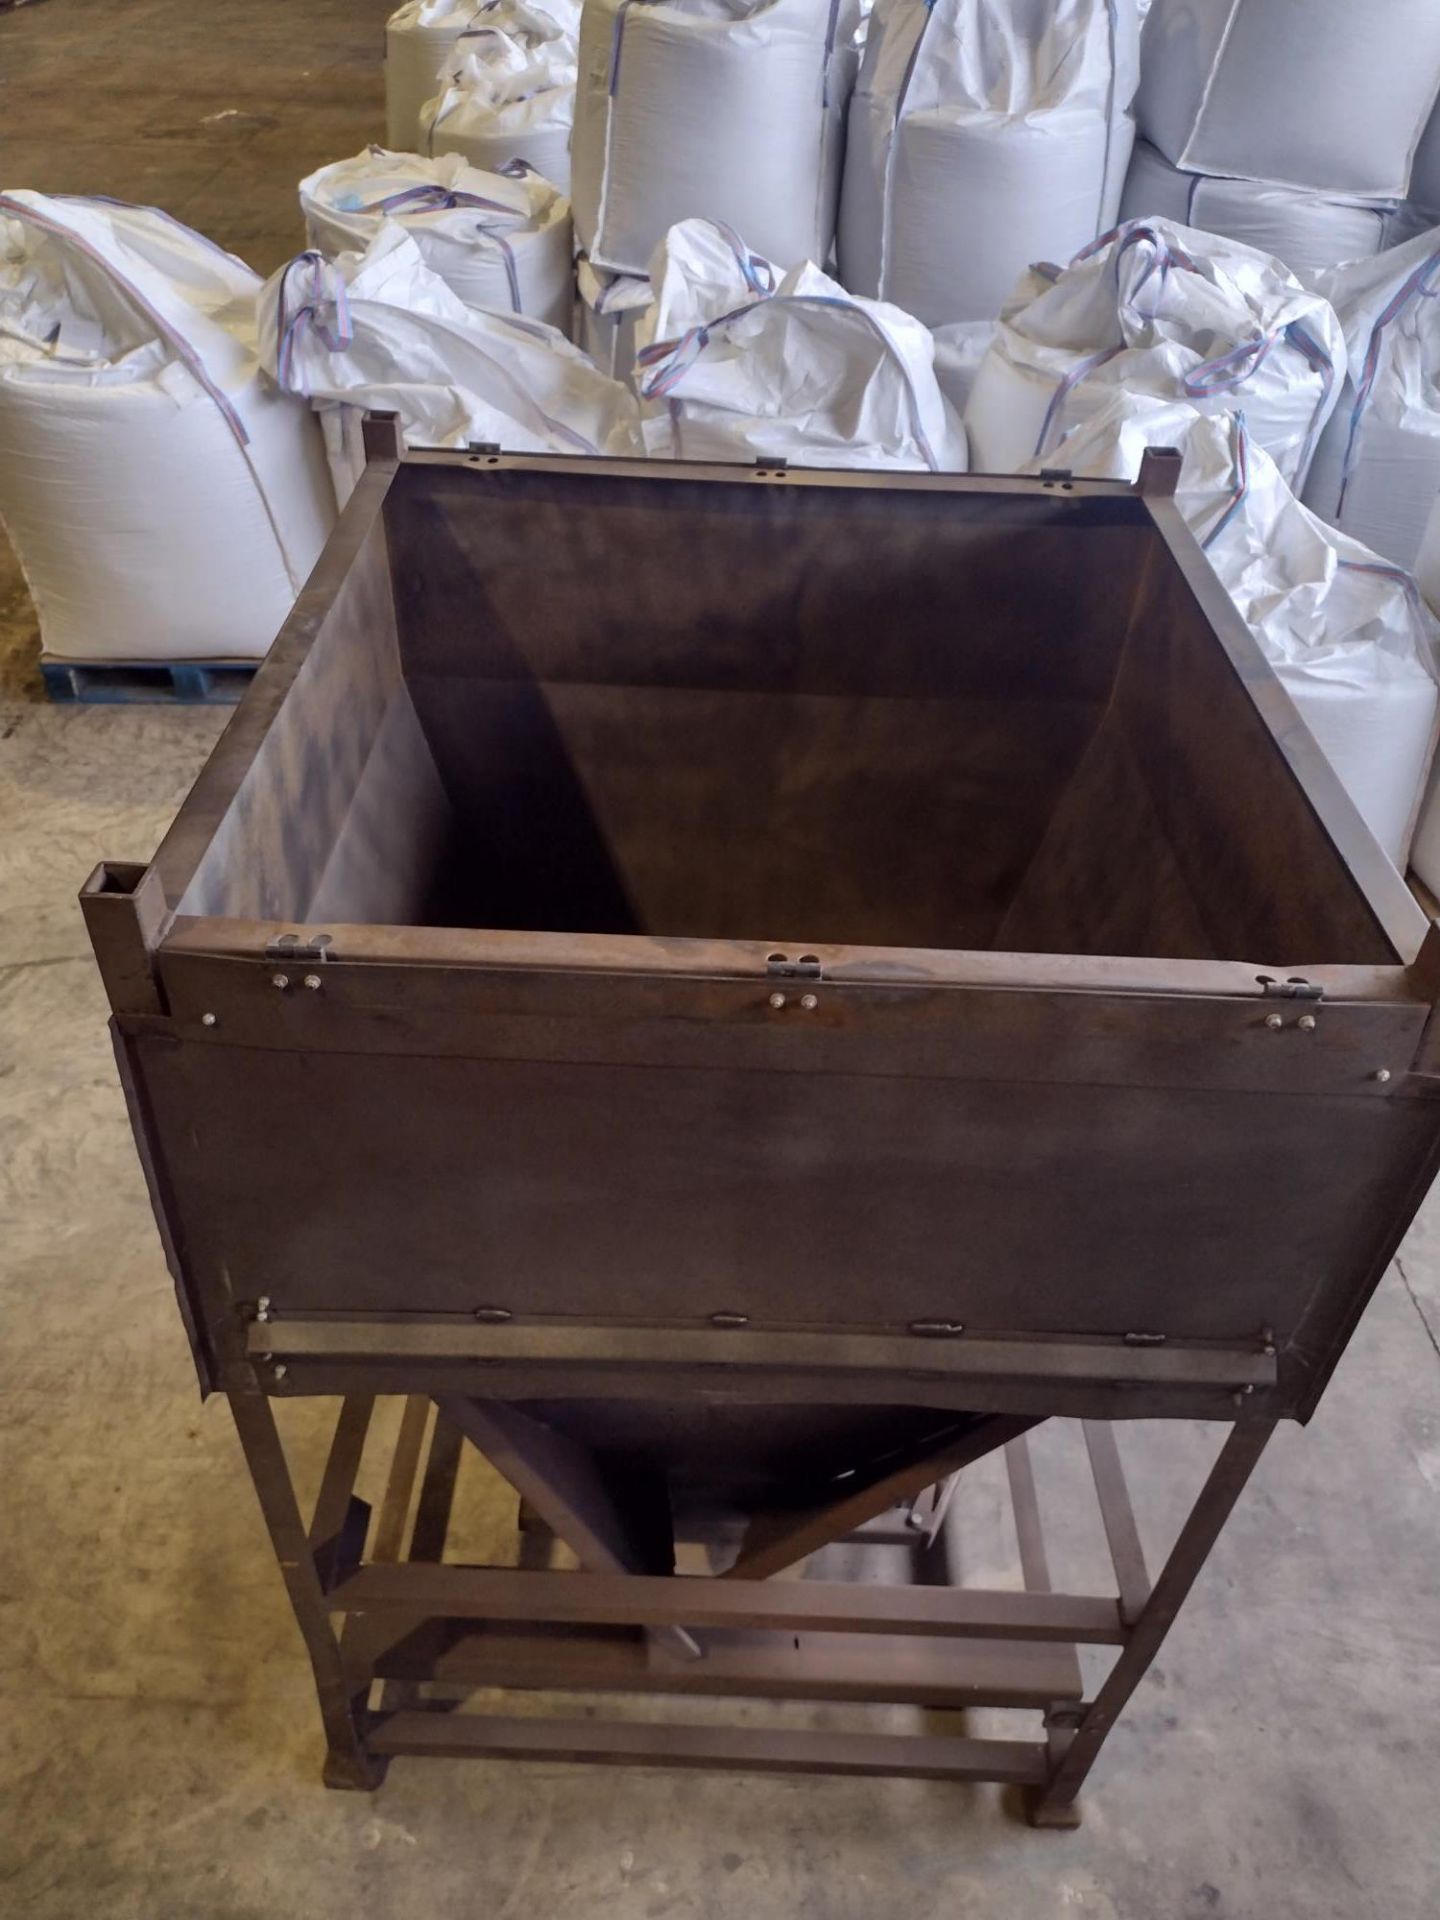 Five Hopper Bottomed Tote Bins, approx. 1285mm x 1285mm x 1950mm. Lot located Bretherton, - Image 2 of 3